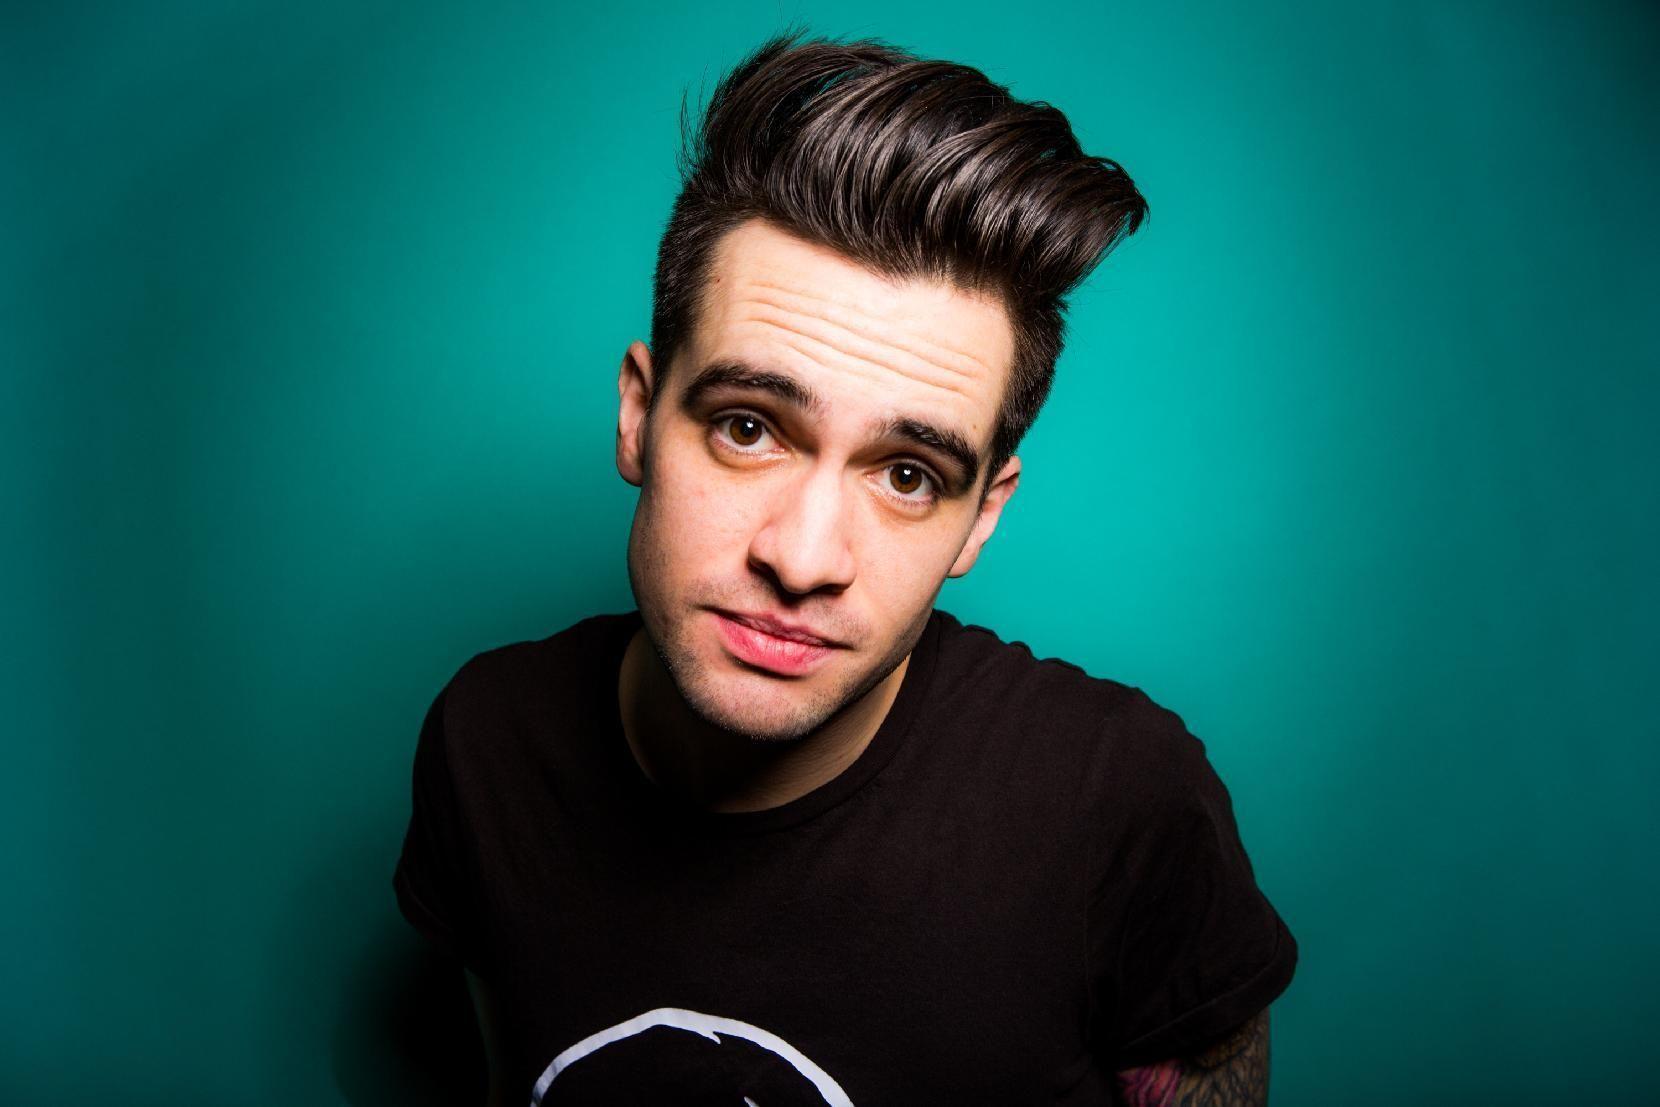 7. Brendon Urie - wide 11